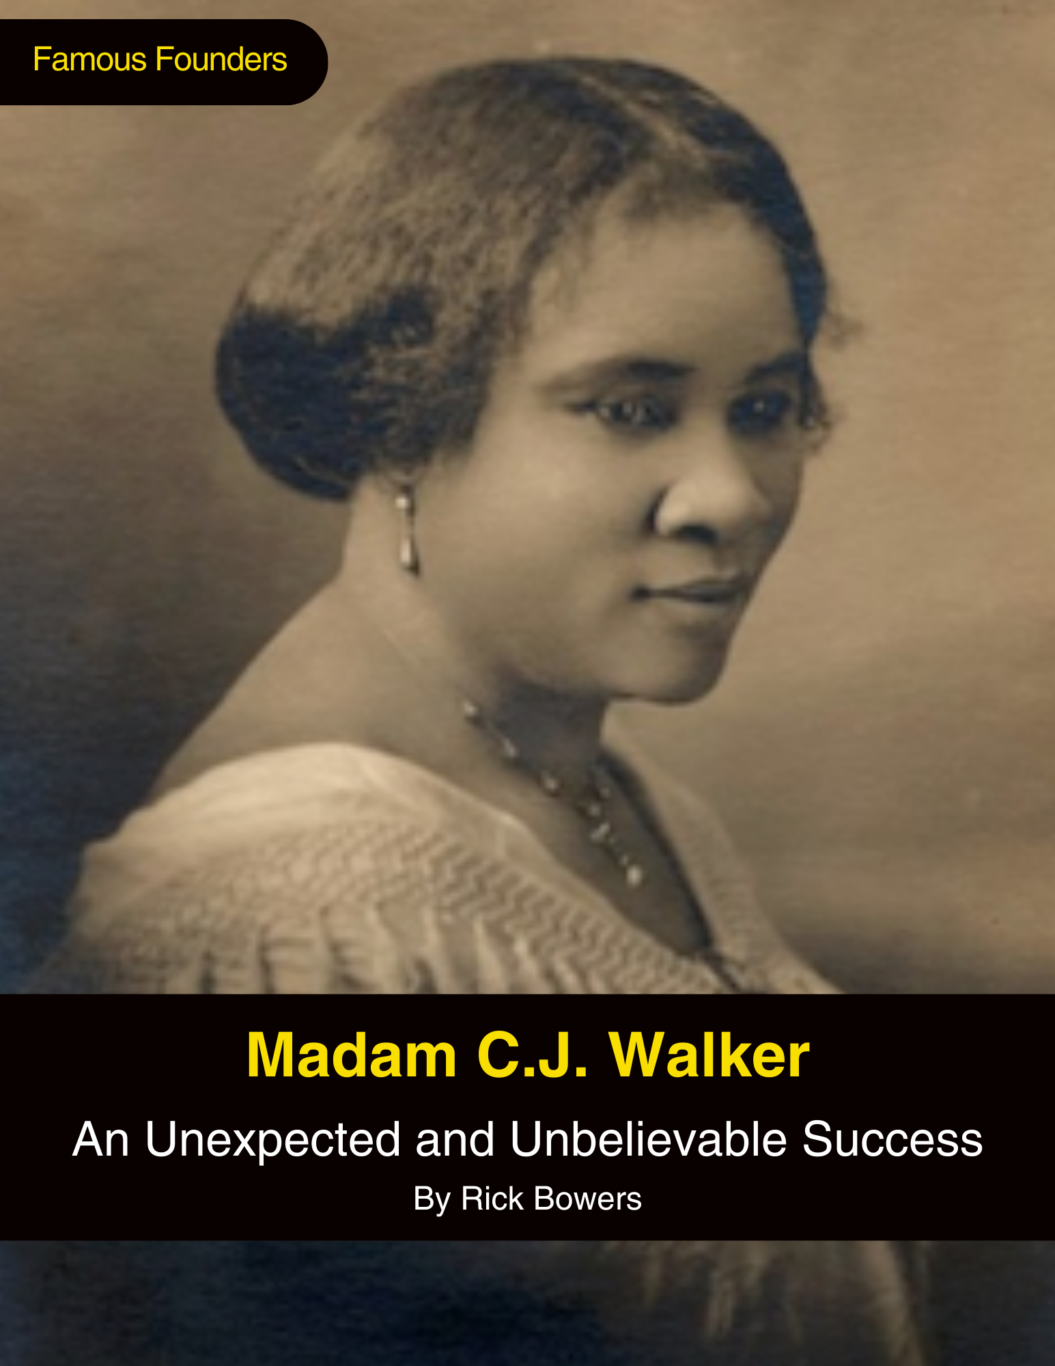 Cover page for Madam C.J. Walker article with a historical picture of Madam C.J. Walker.